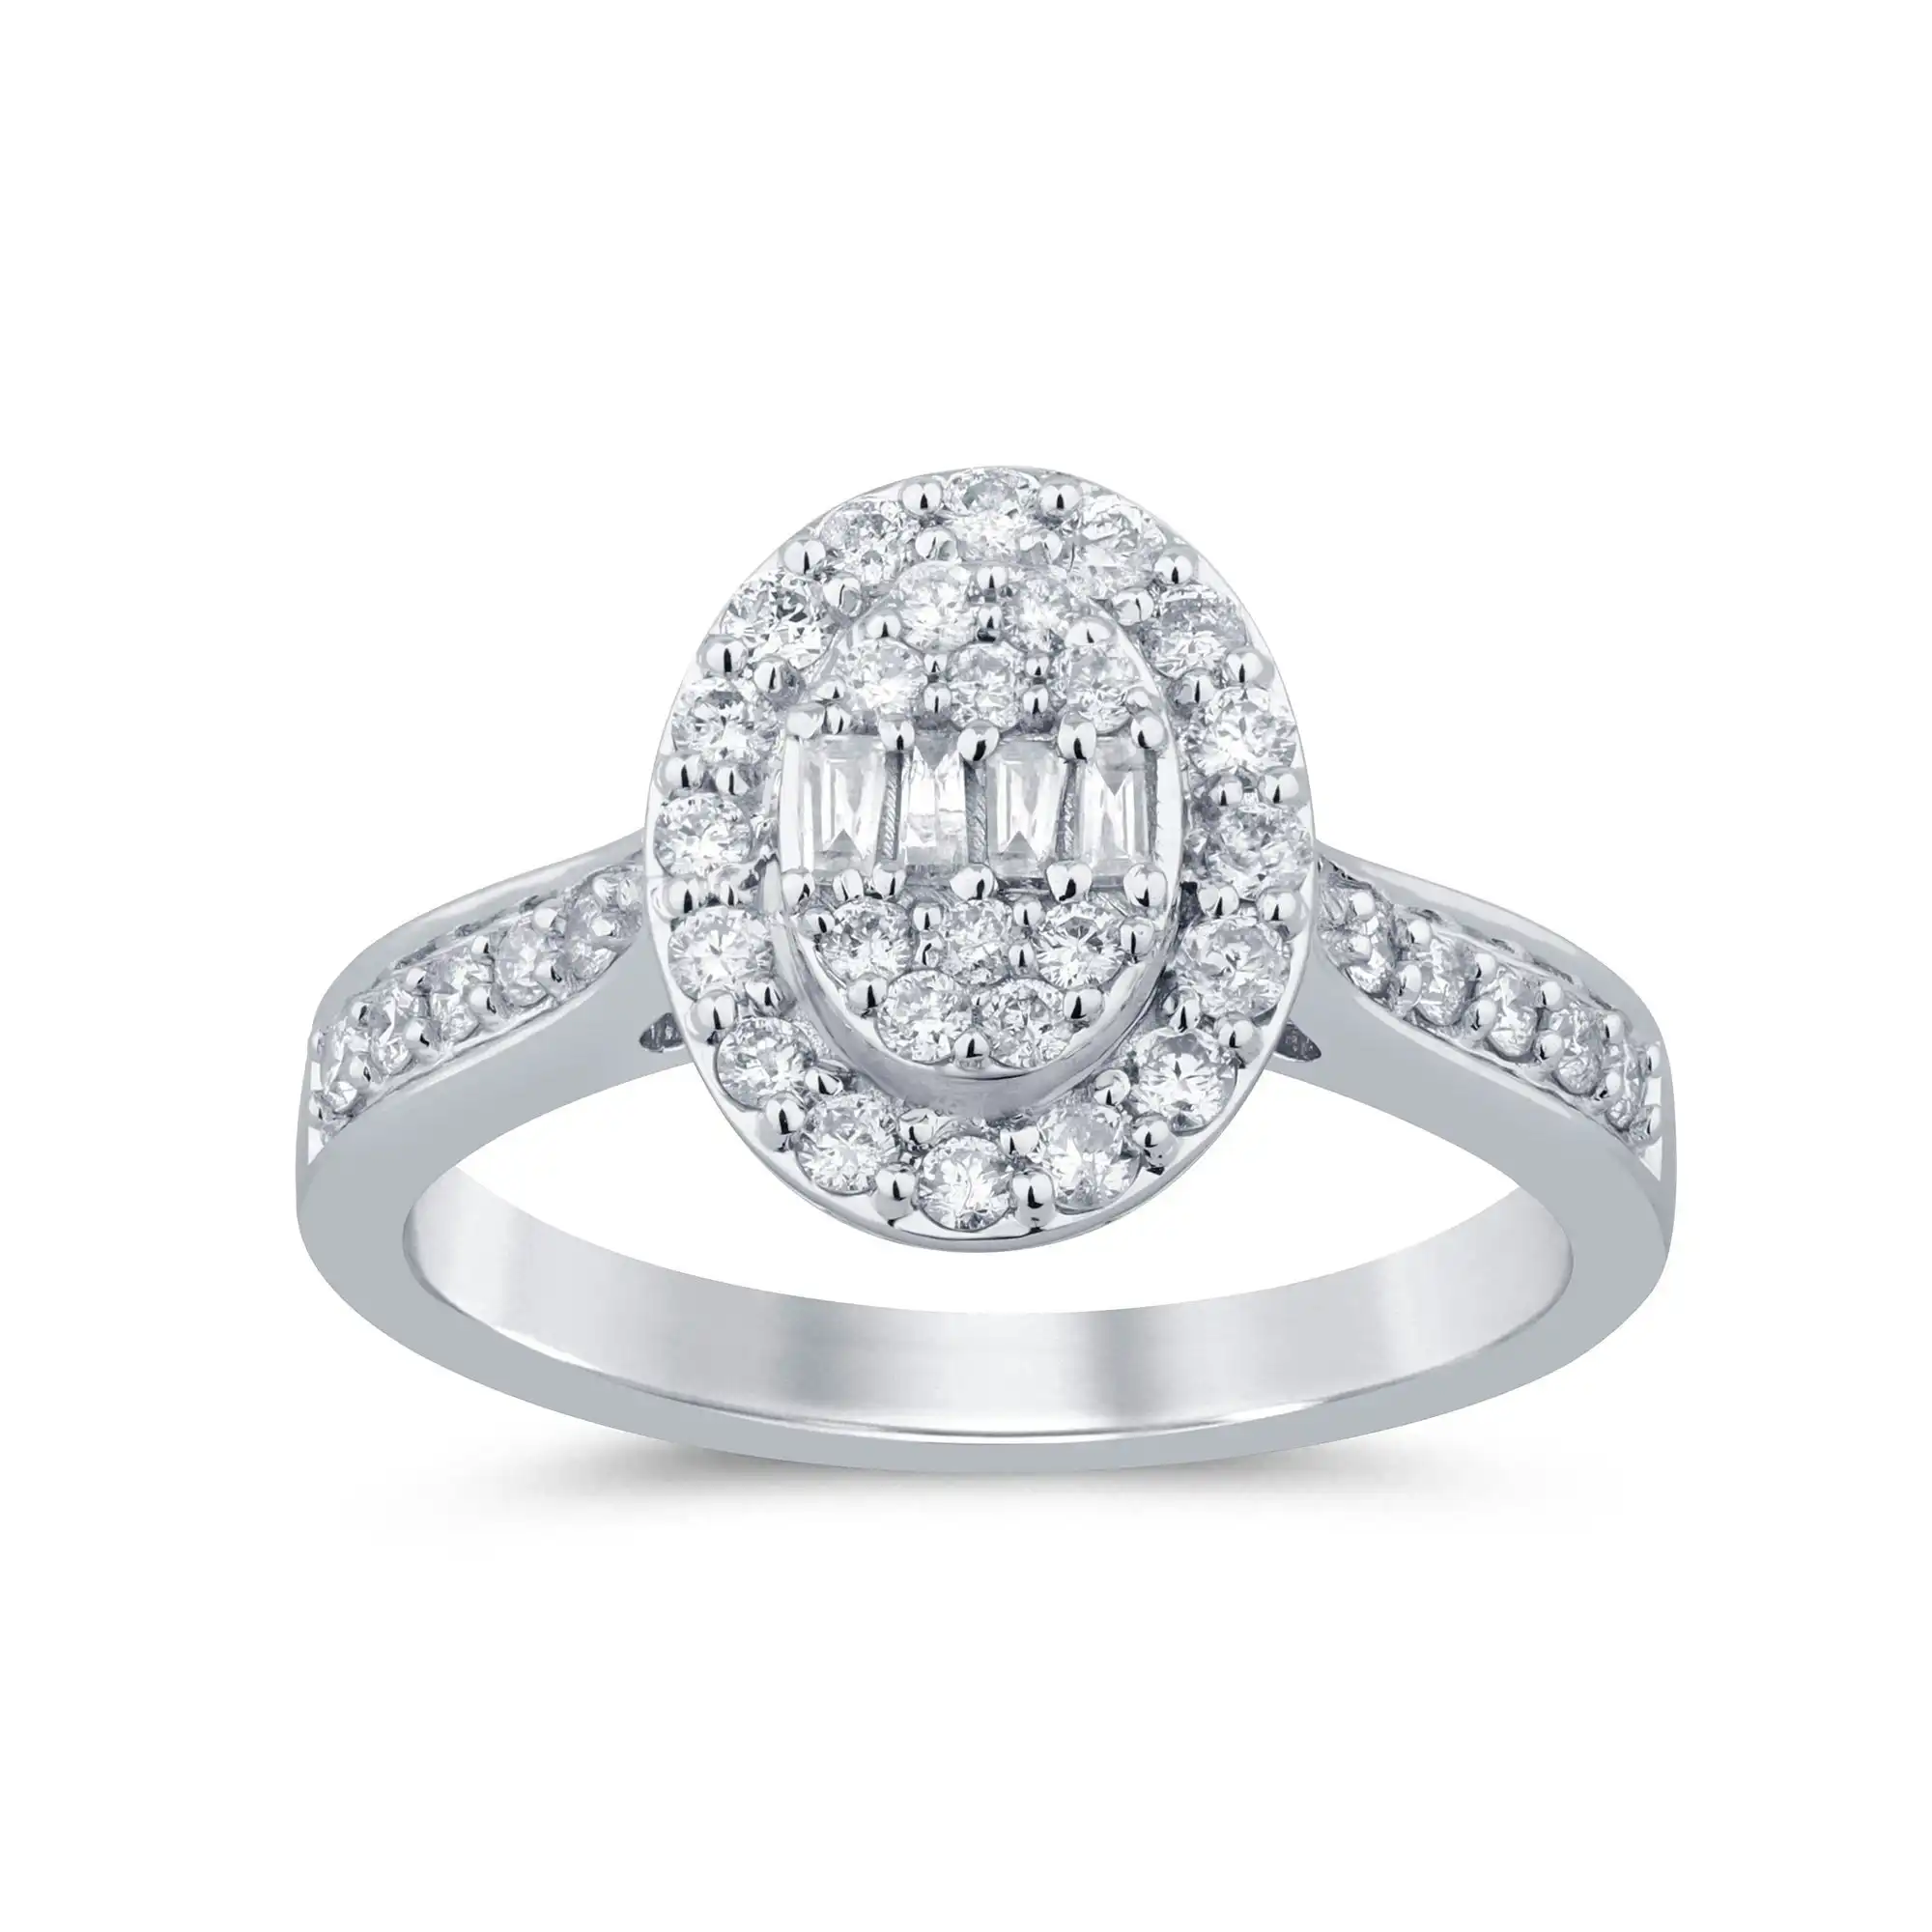 Oval Halo Baguette Ring with 1/2ct of Diamonds in 9ct White Gold